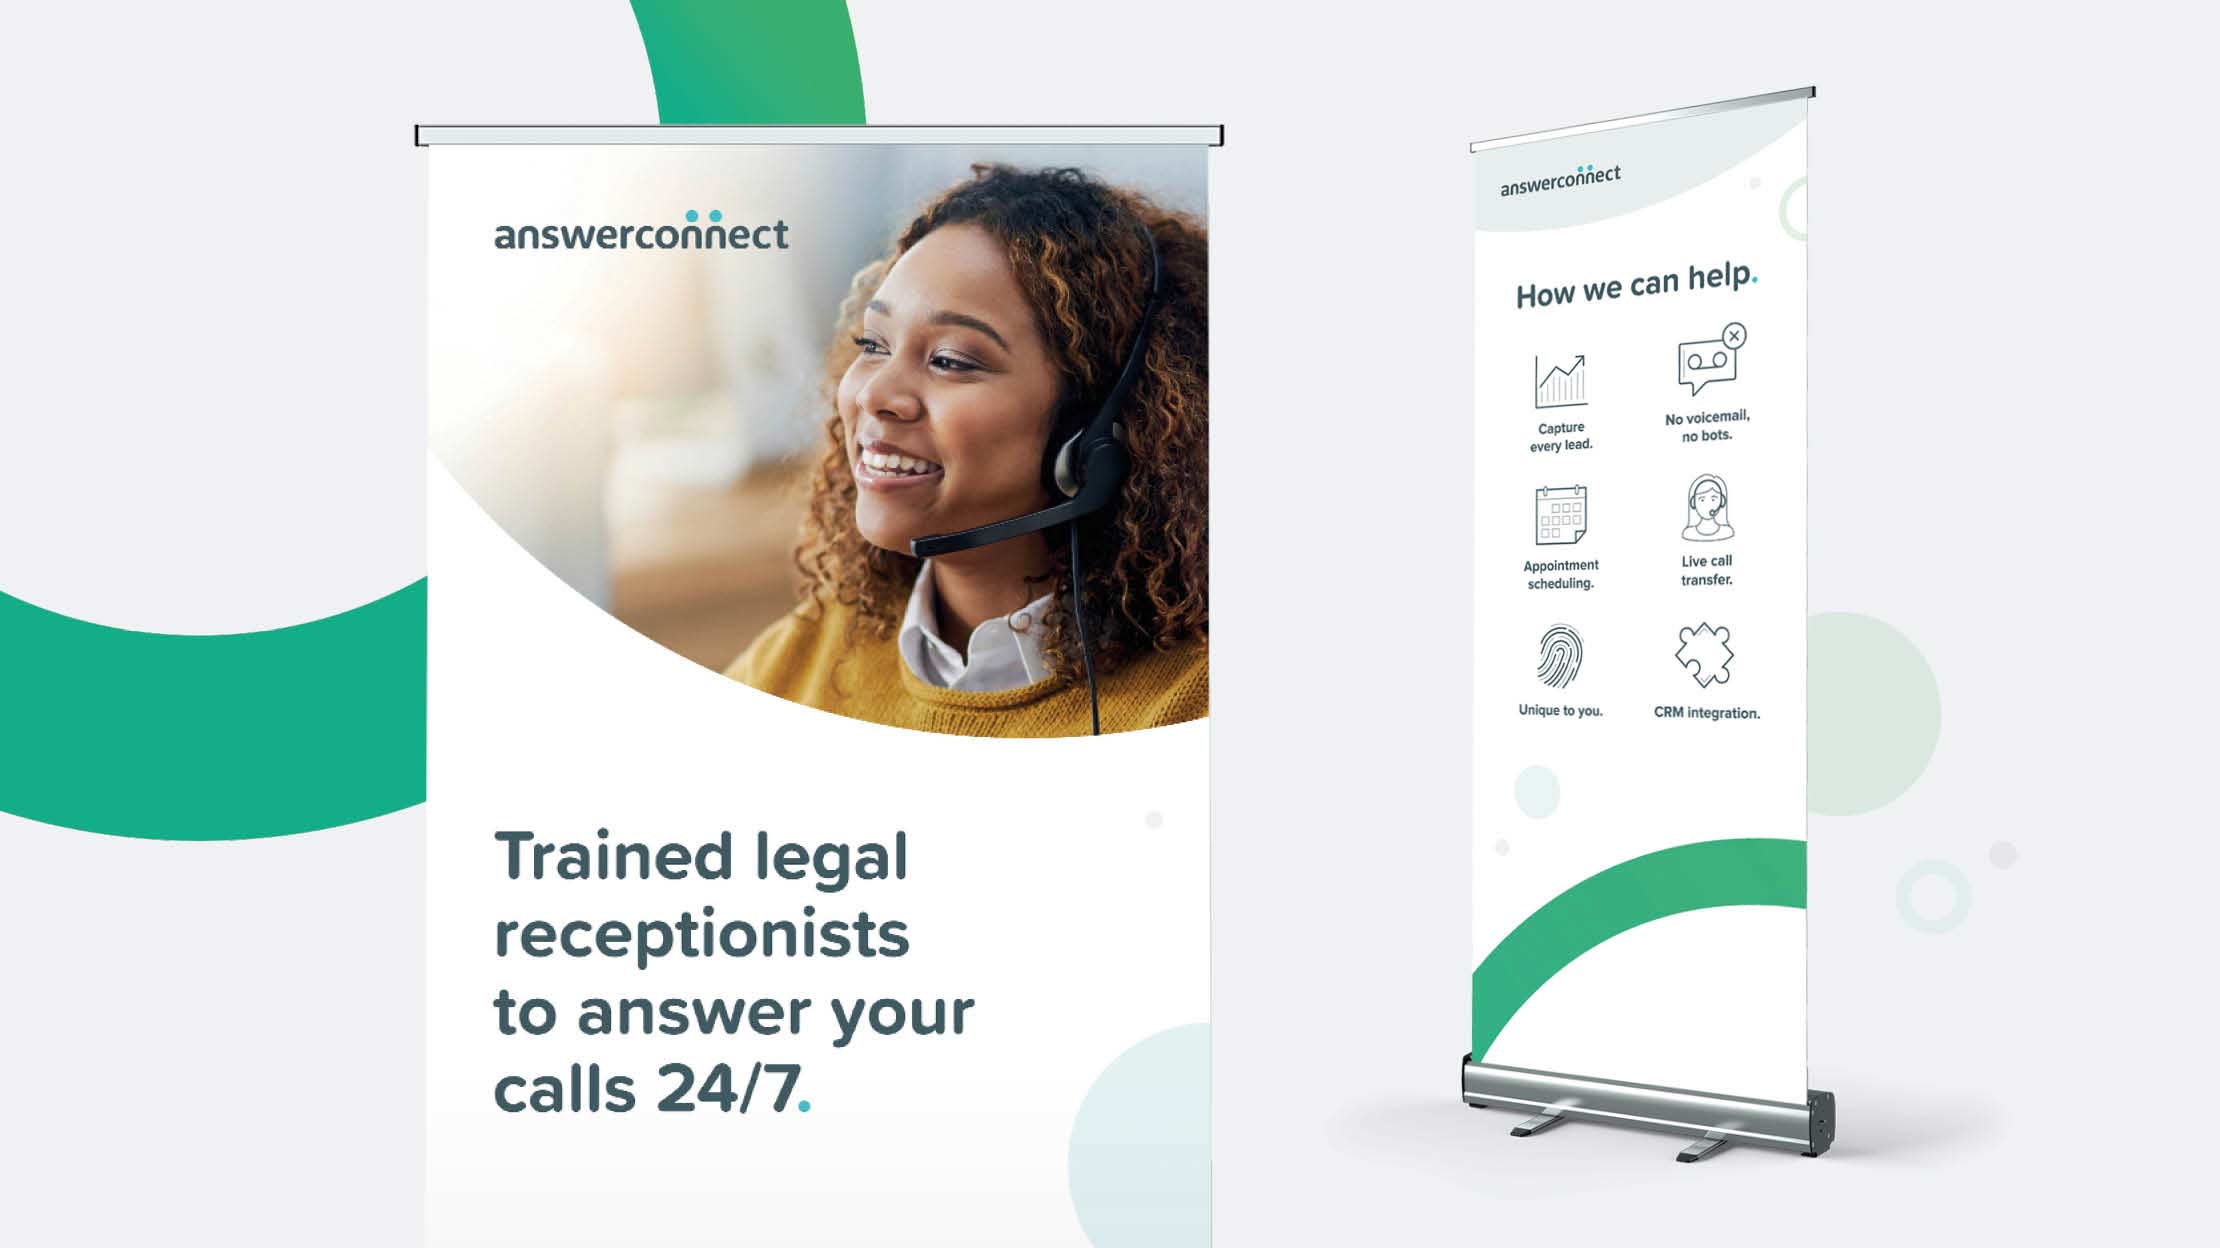 Popup banners designed for AnswerConnect, featuring a friendly woman wearing a headset. The text reads "Trained legal receptionists to answer your calls 24/7."